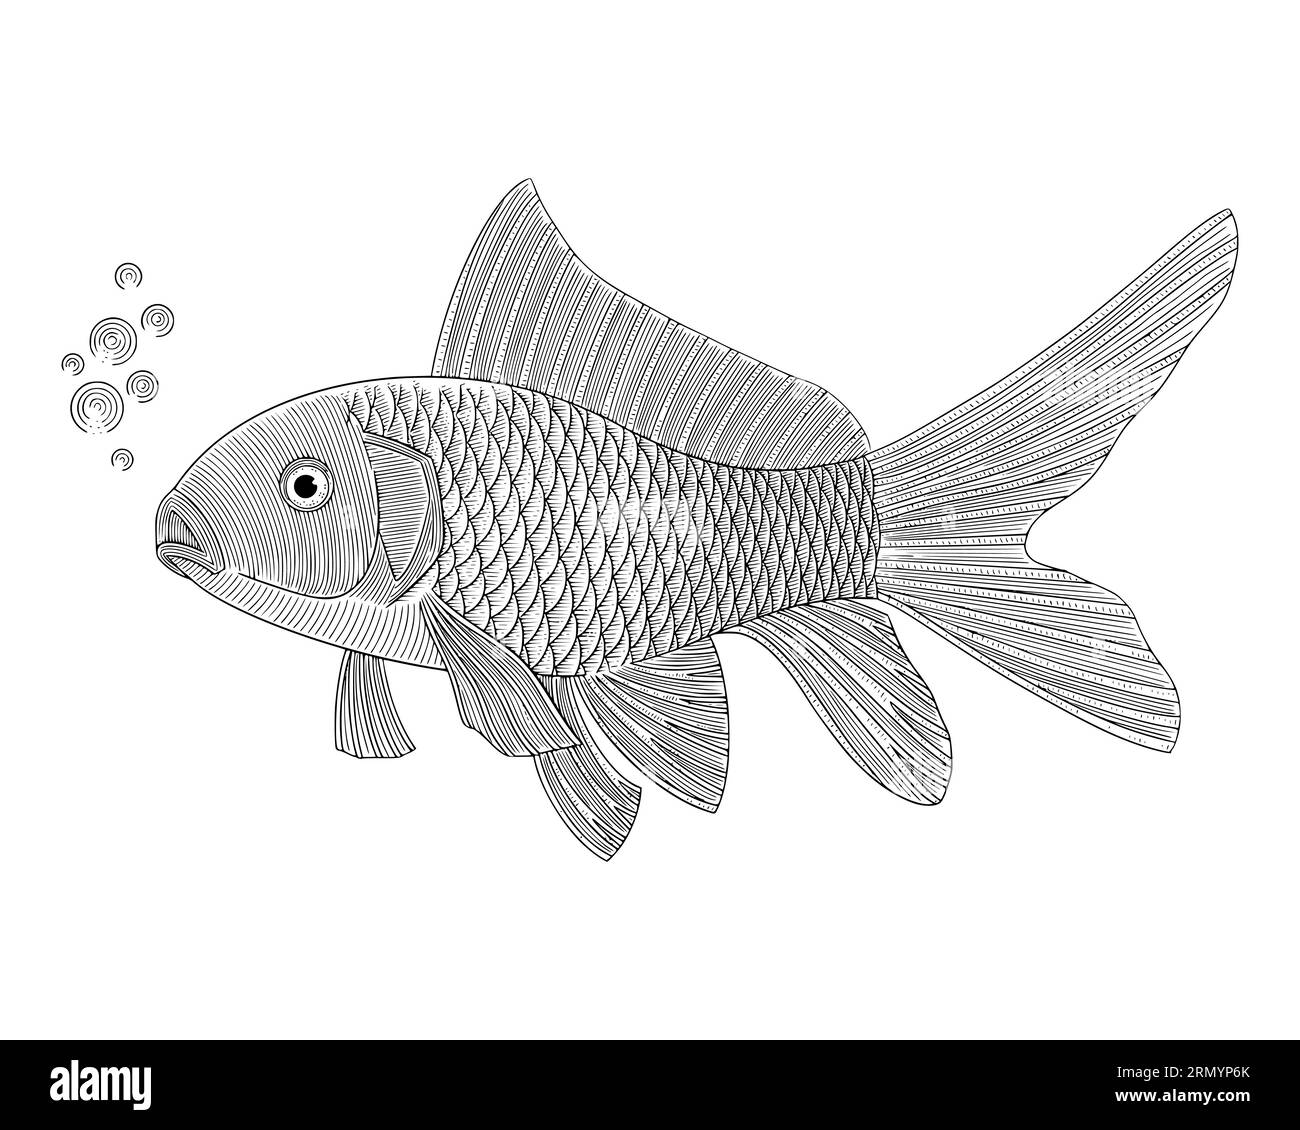 goldfish, vintage engraving drawing style vector illustration Stock Vector